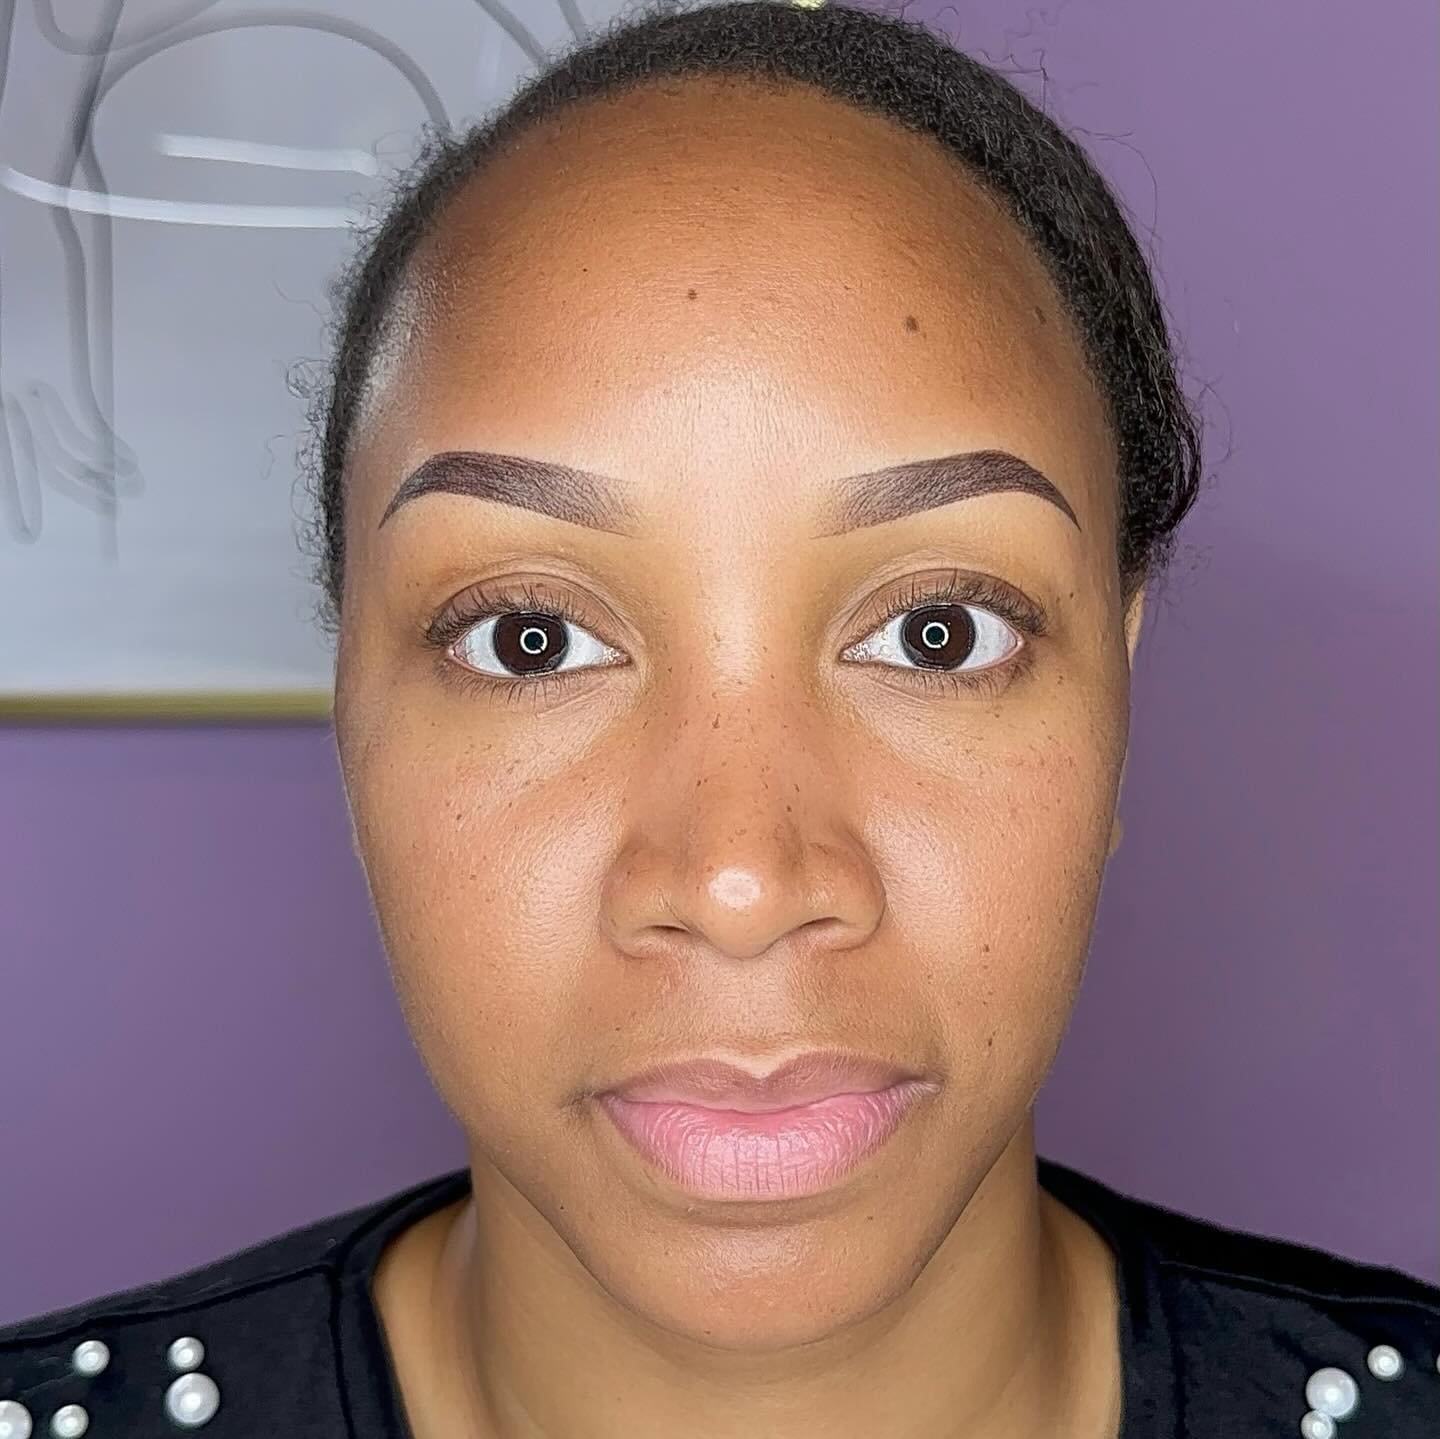 Wake up everyday with beautiful brows 😍
Service: Ombr&eacute; Powder Brows 
&bull;
&bull;
&bull;
&bull;
&bull;
&bull;
#atlantamicroblading #microblading #ombrepowderbrows #nanostrokes #nanostrokesatlanta #ombrepowderbrowsatlanta #atlantaeyebrows #na